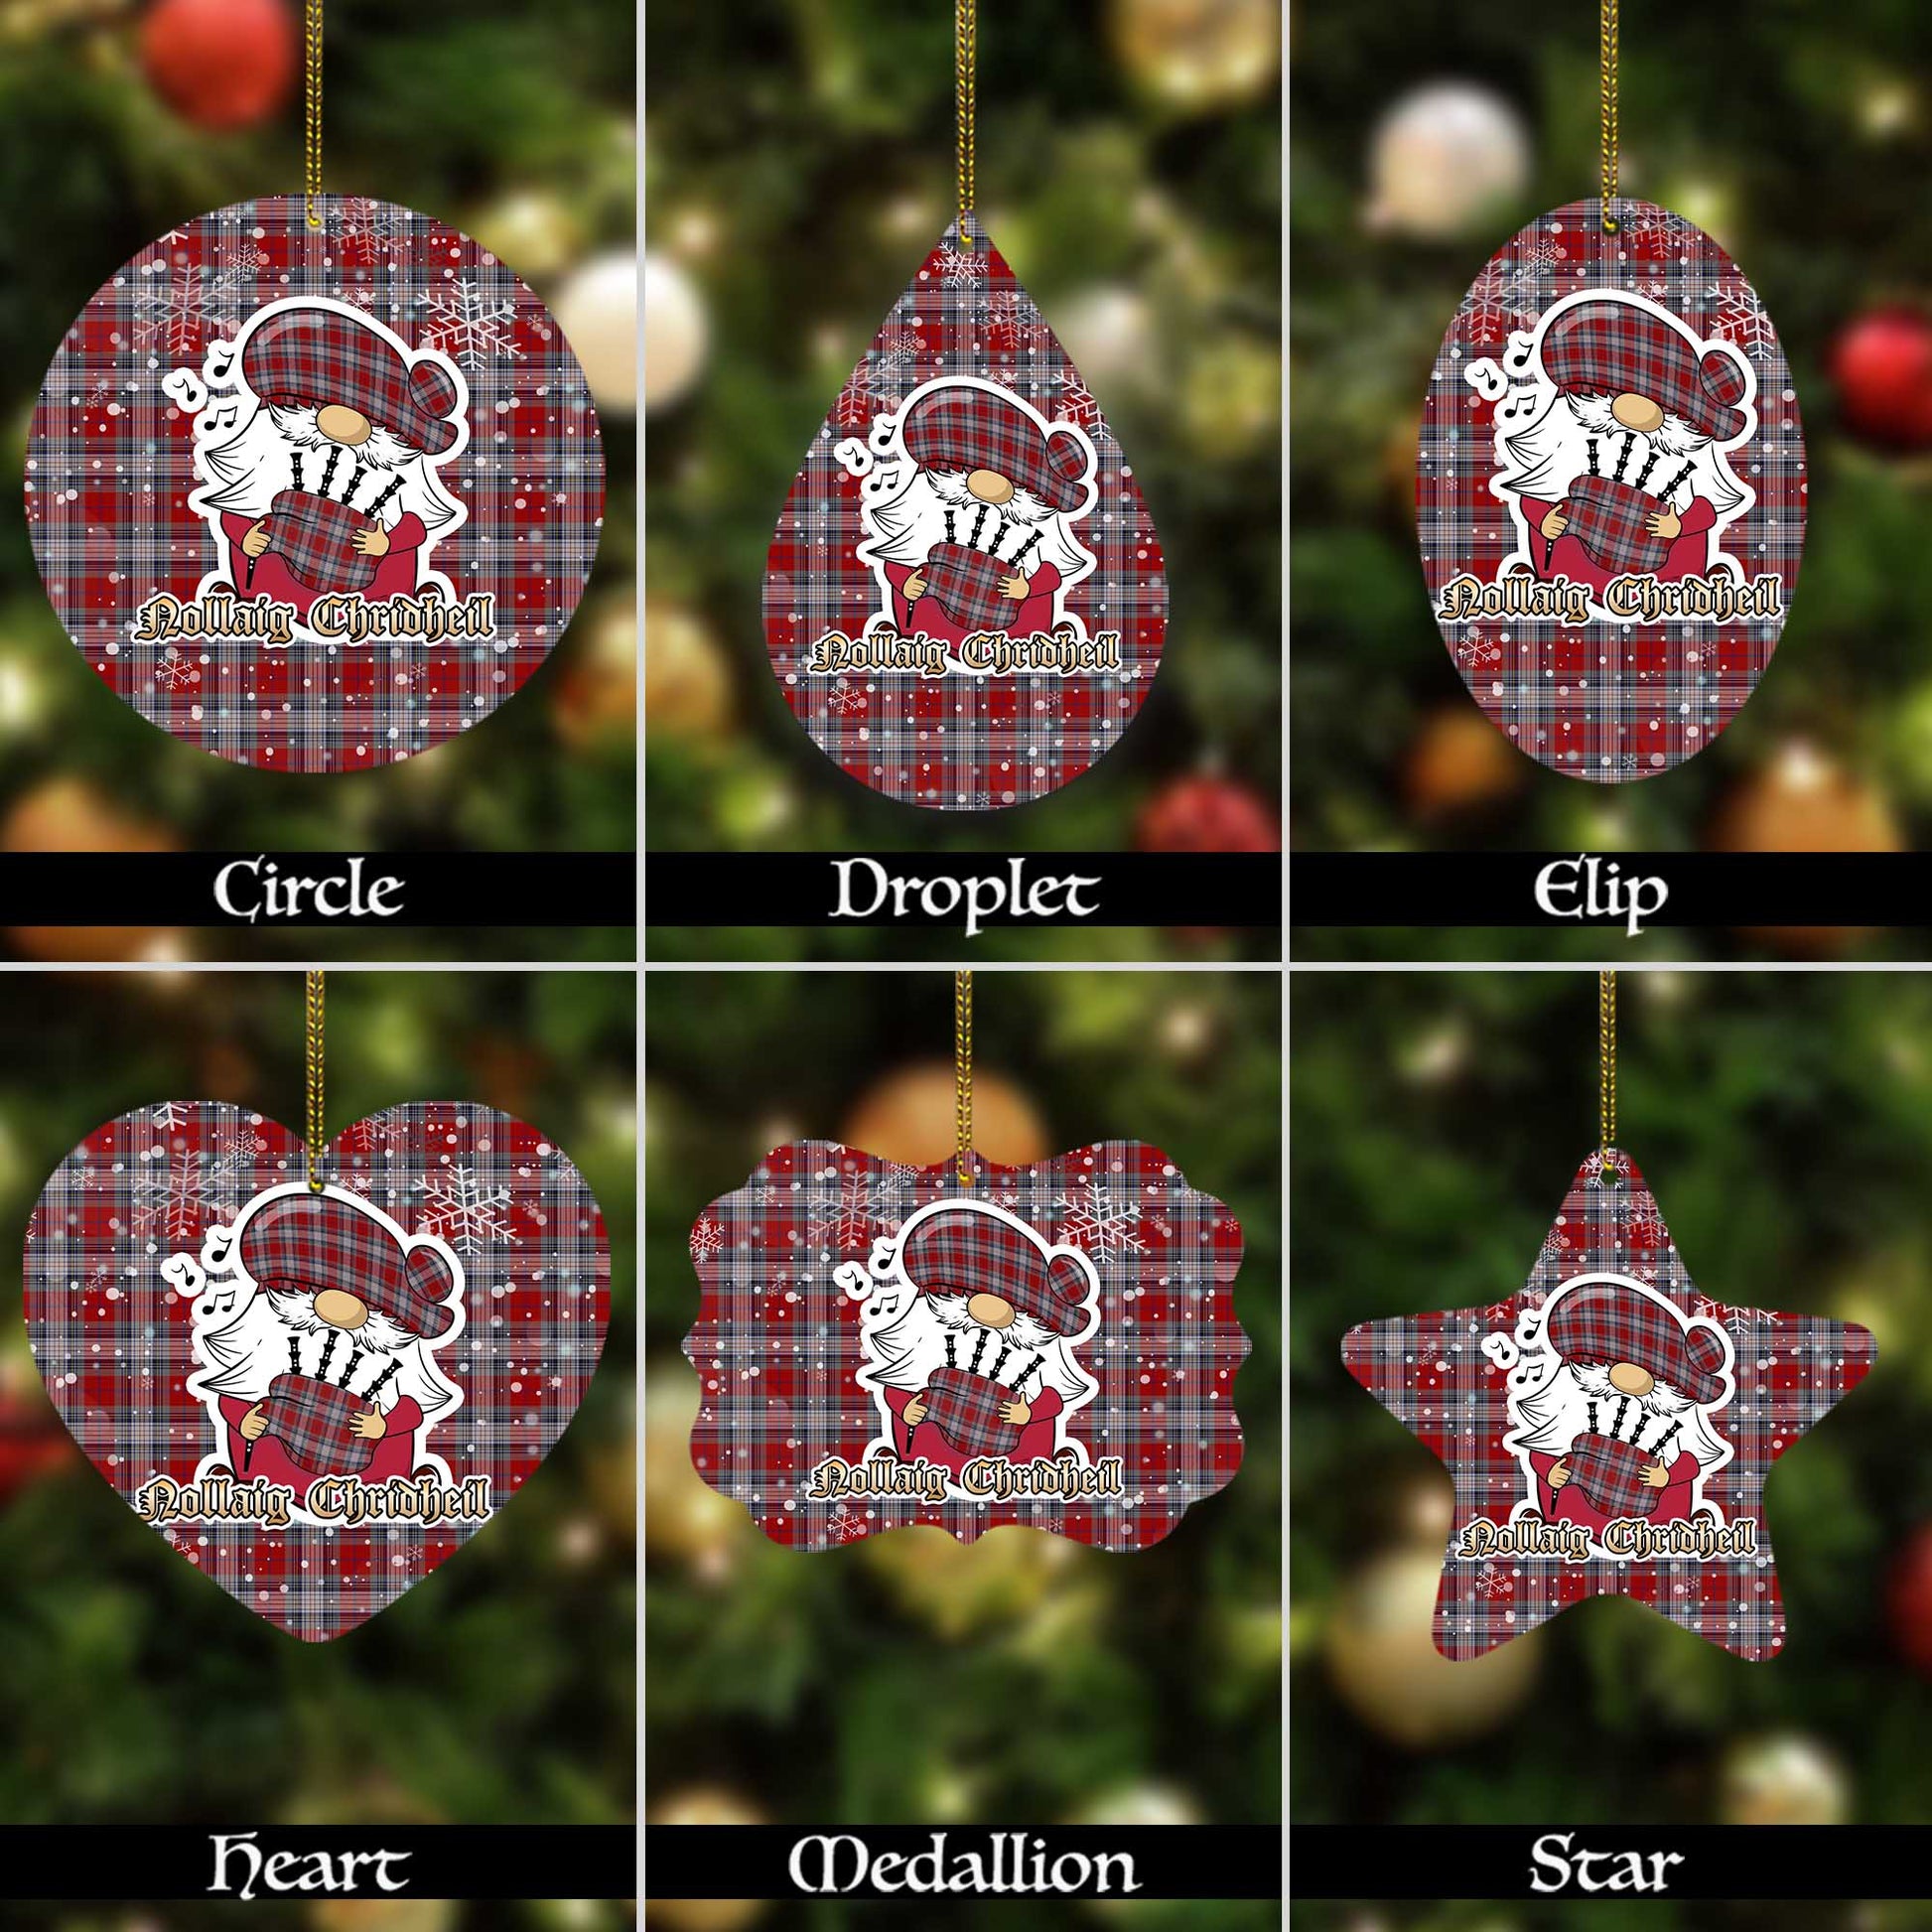 warden-tartan-christmas-ornaments-with-scottish-gnome-playing-bagpipes